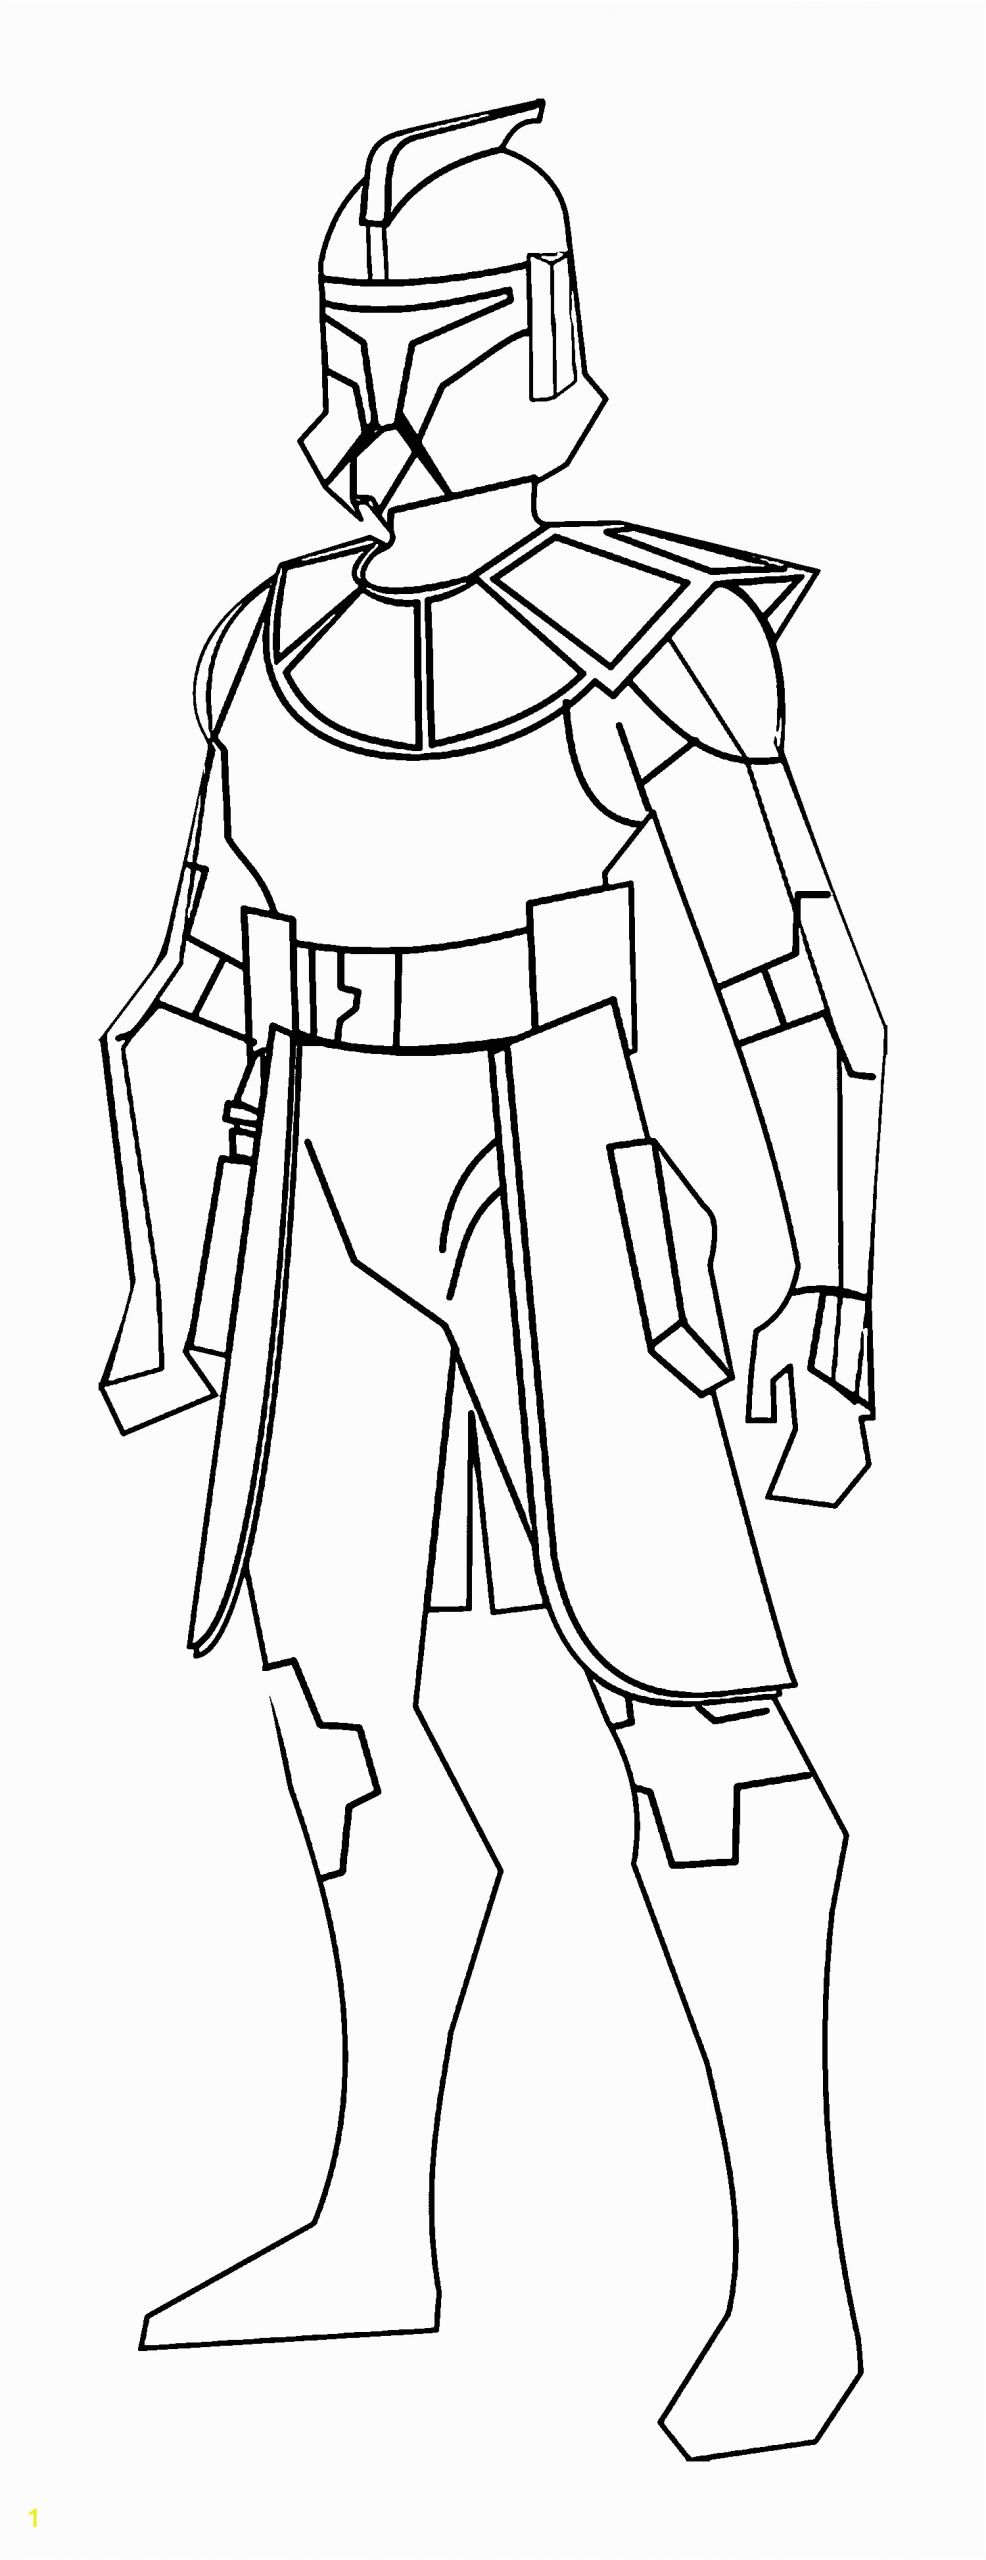 Star Wars Clone Trooper Coloring Pages Storm Trooper Coloring Page at Getcolorings